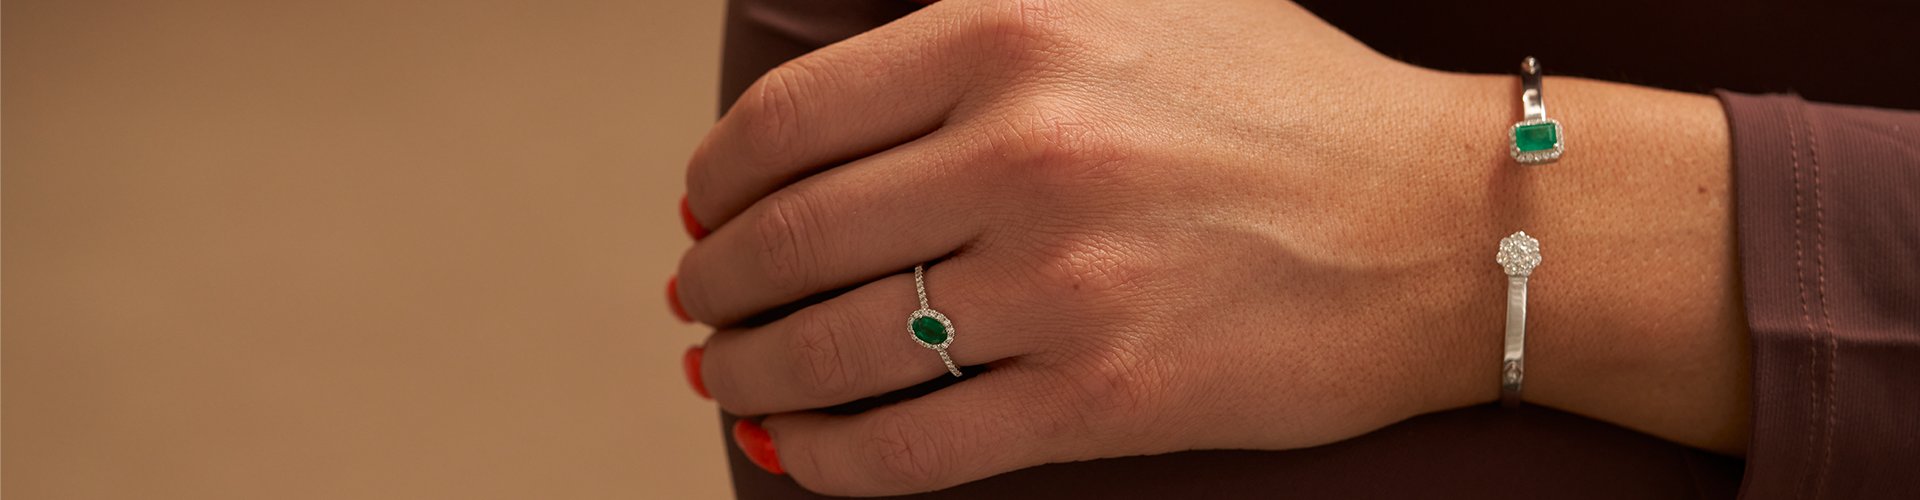 Stylish woman showcasing a radiant emerald ring and matching bracelet from the Park City Jewelers' Emerald Collection.